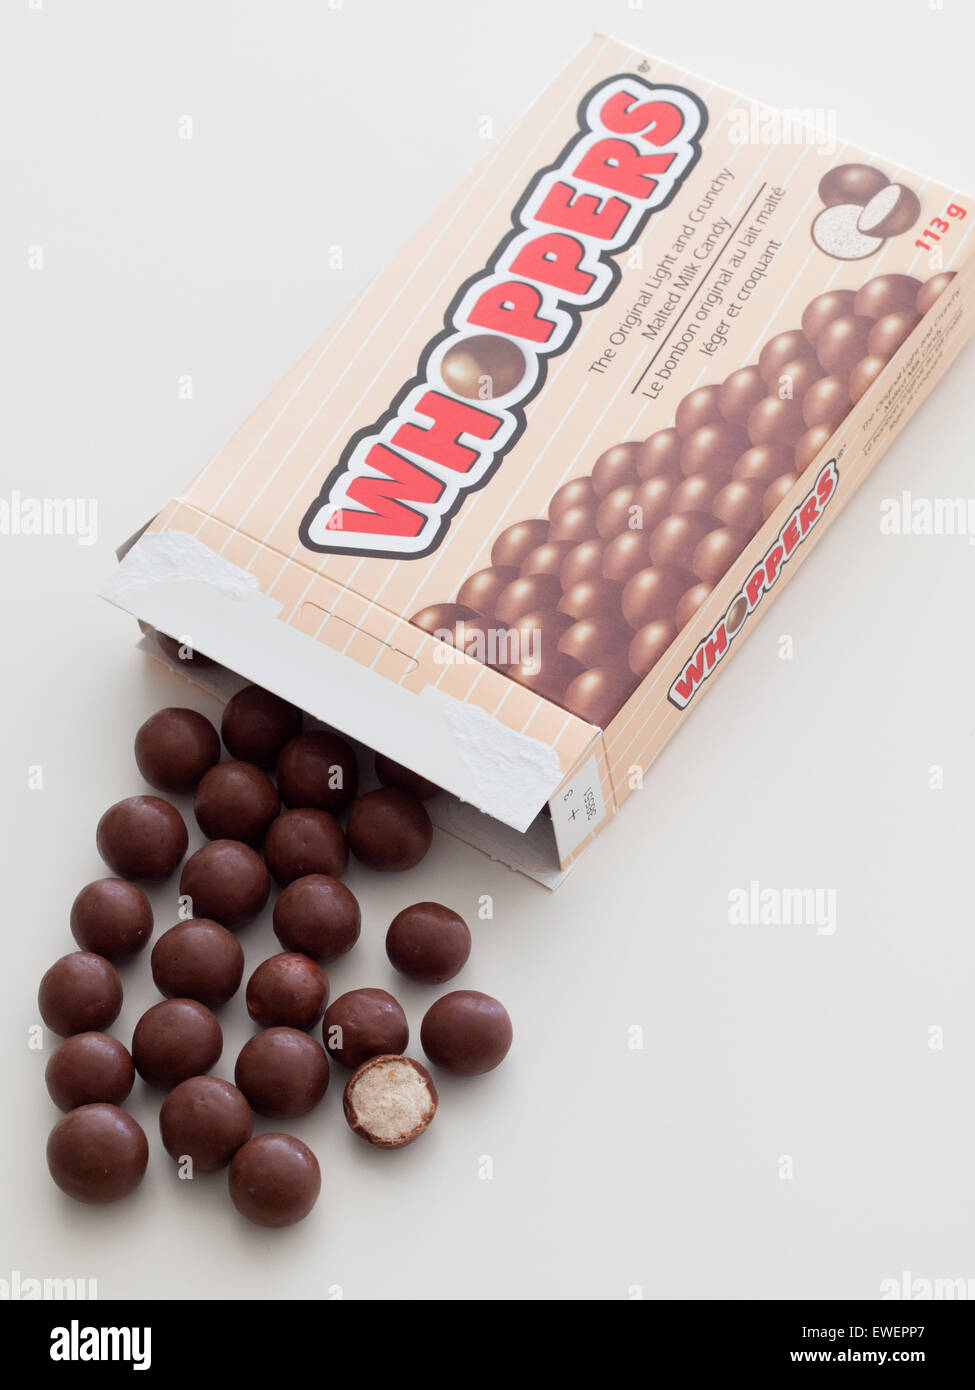 A box of Whoppers candy. Whoppers are malted milk balls covered